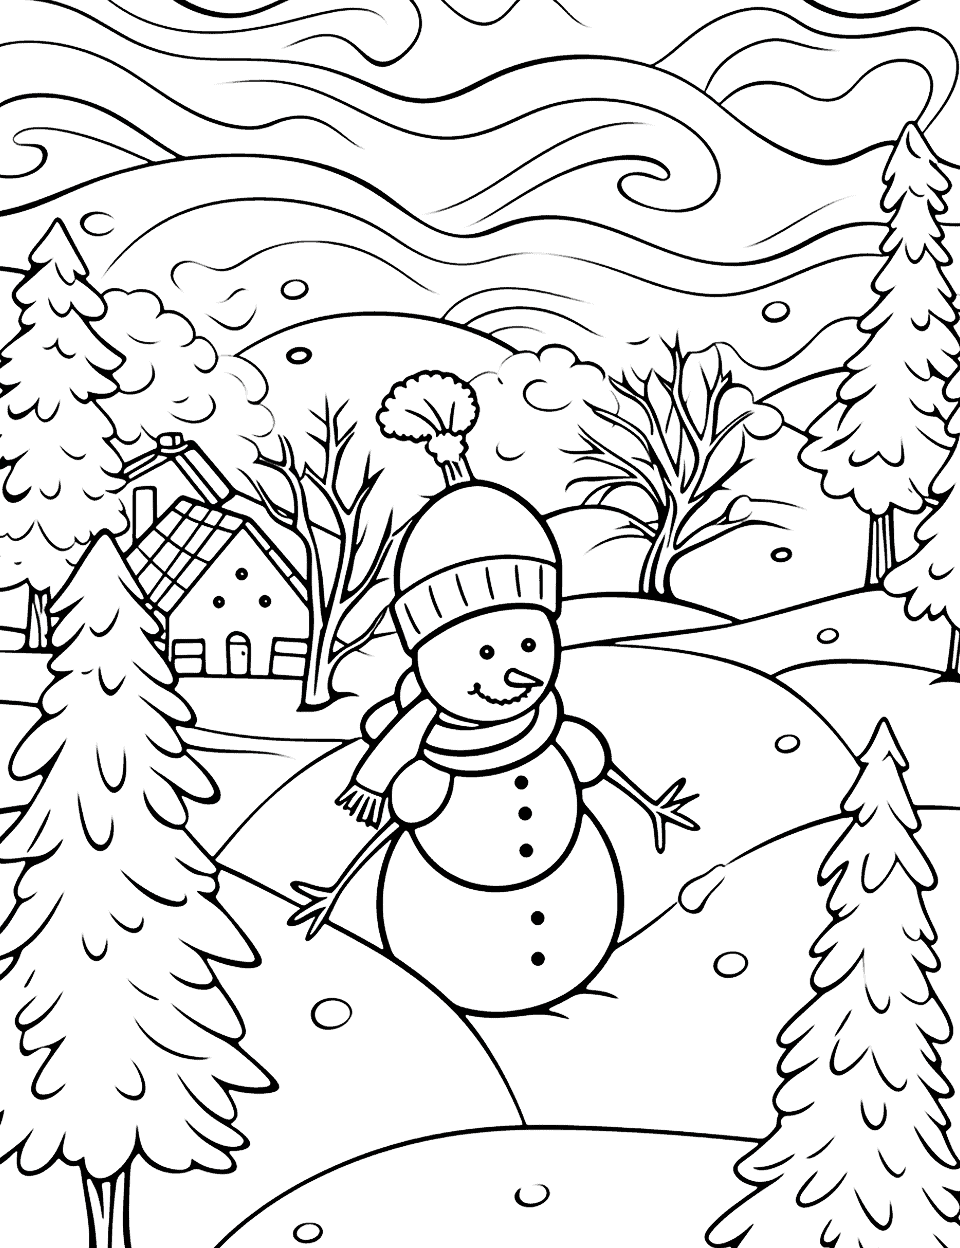 Winter Blizzard Coloring Page - A snowman standing in the middle of a snowstorm.